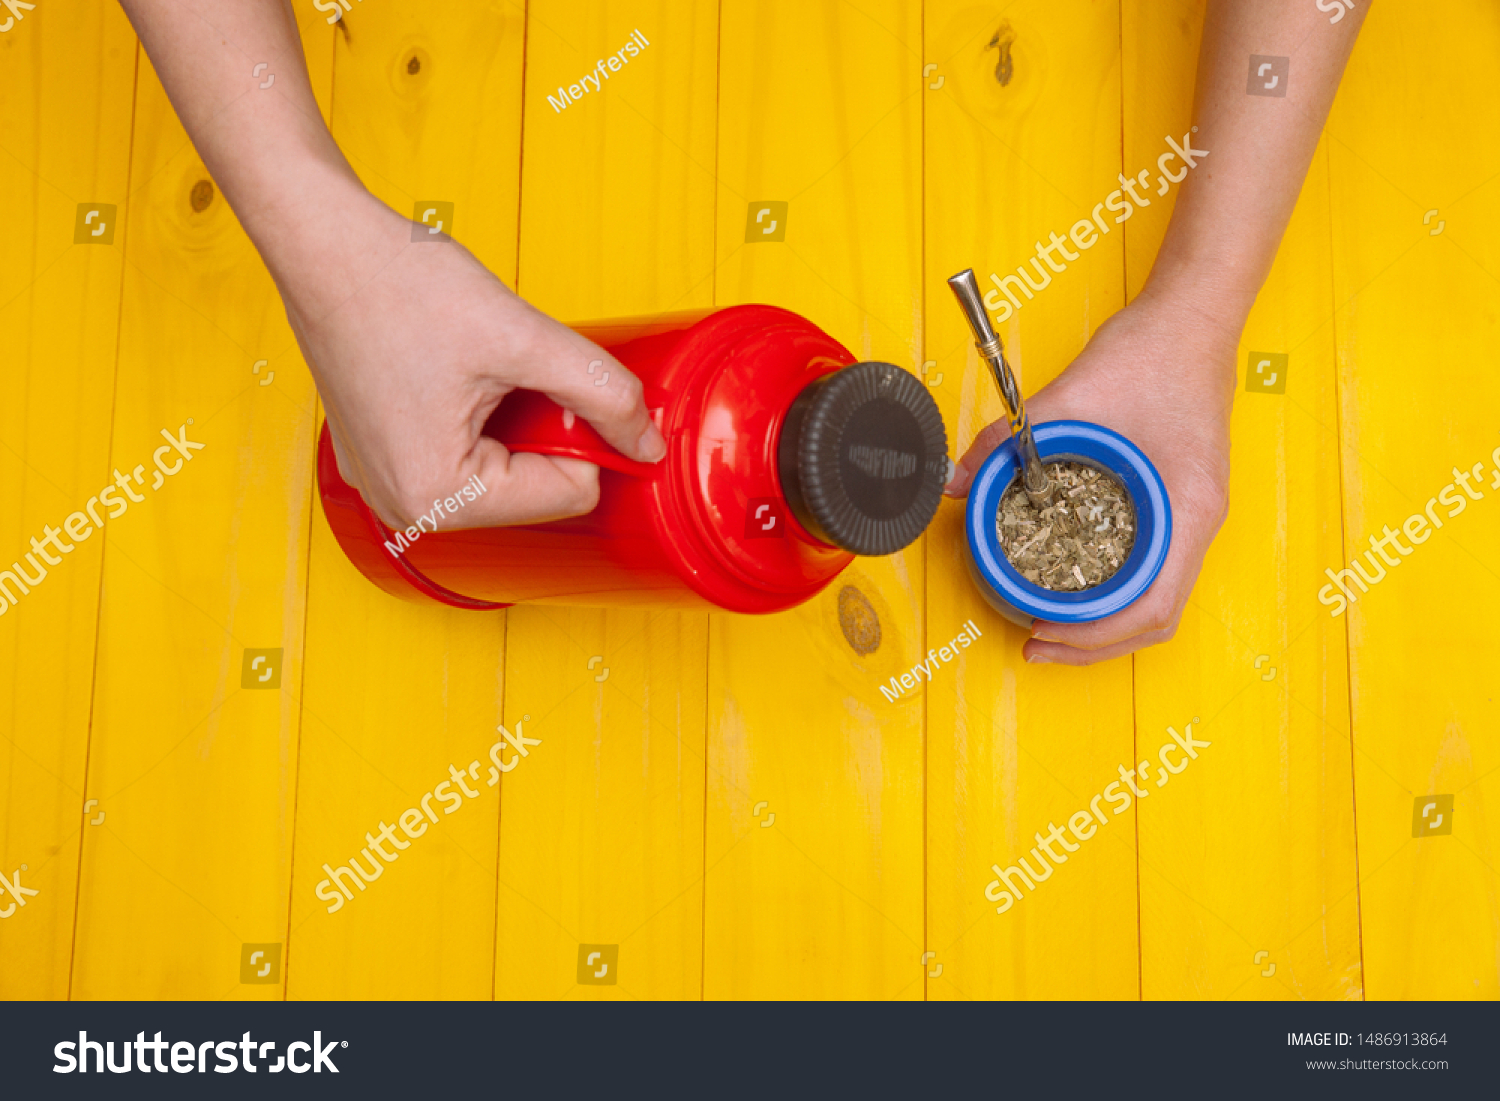 Blue Matte Red Thermos Yellow Wooden Food And Drink Stock Image 1486913864